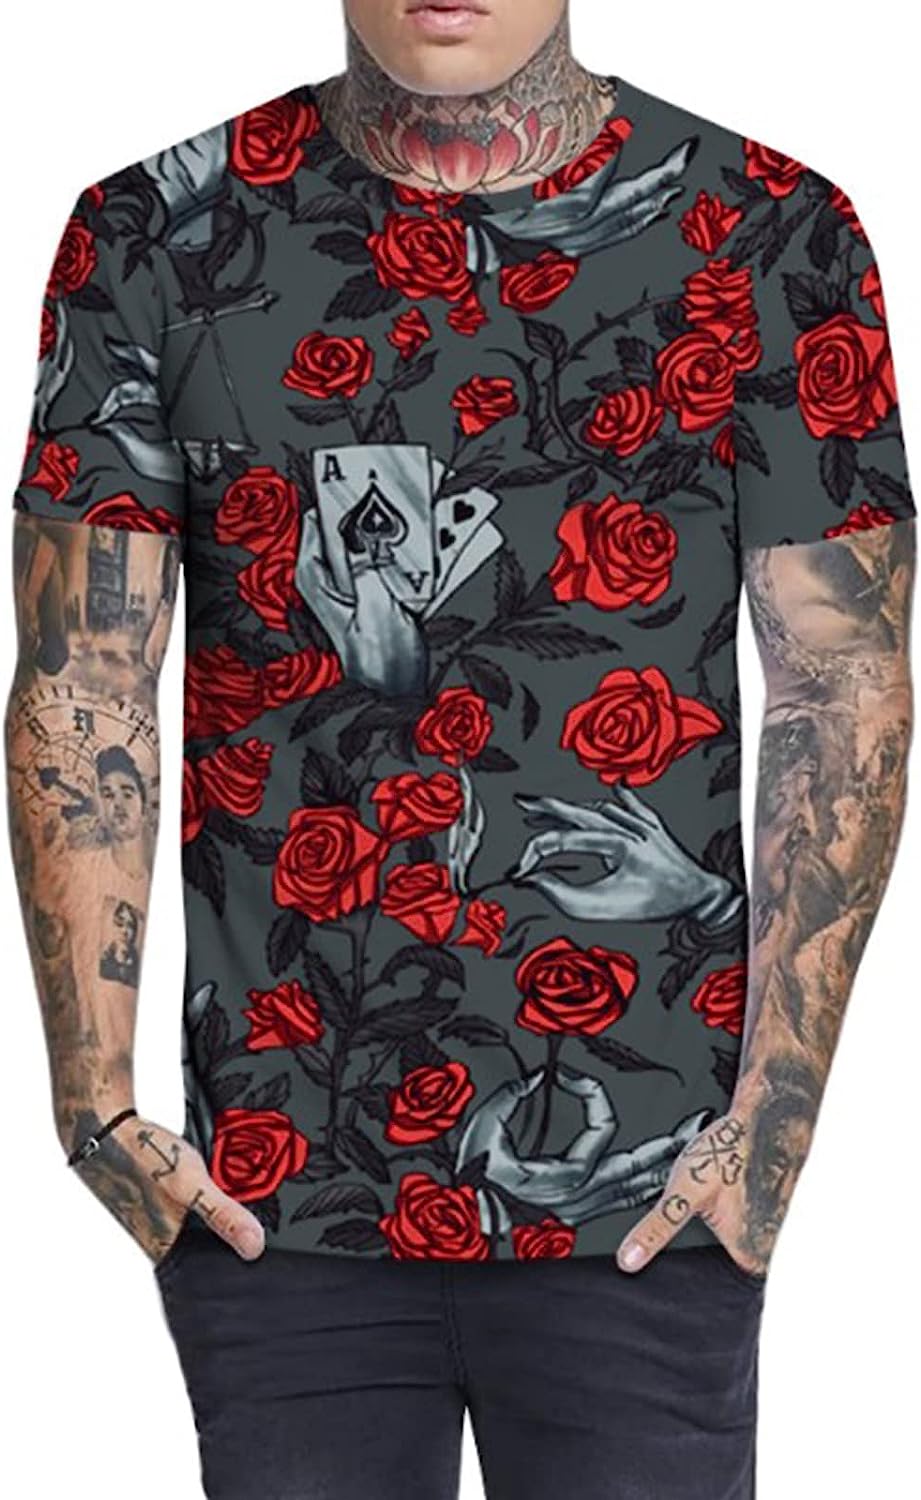 SHEIN Floral and Deck Print Tee - Negative Apparel